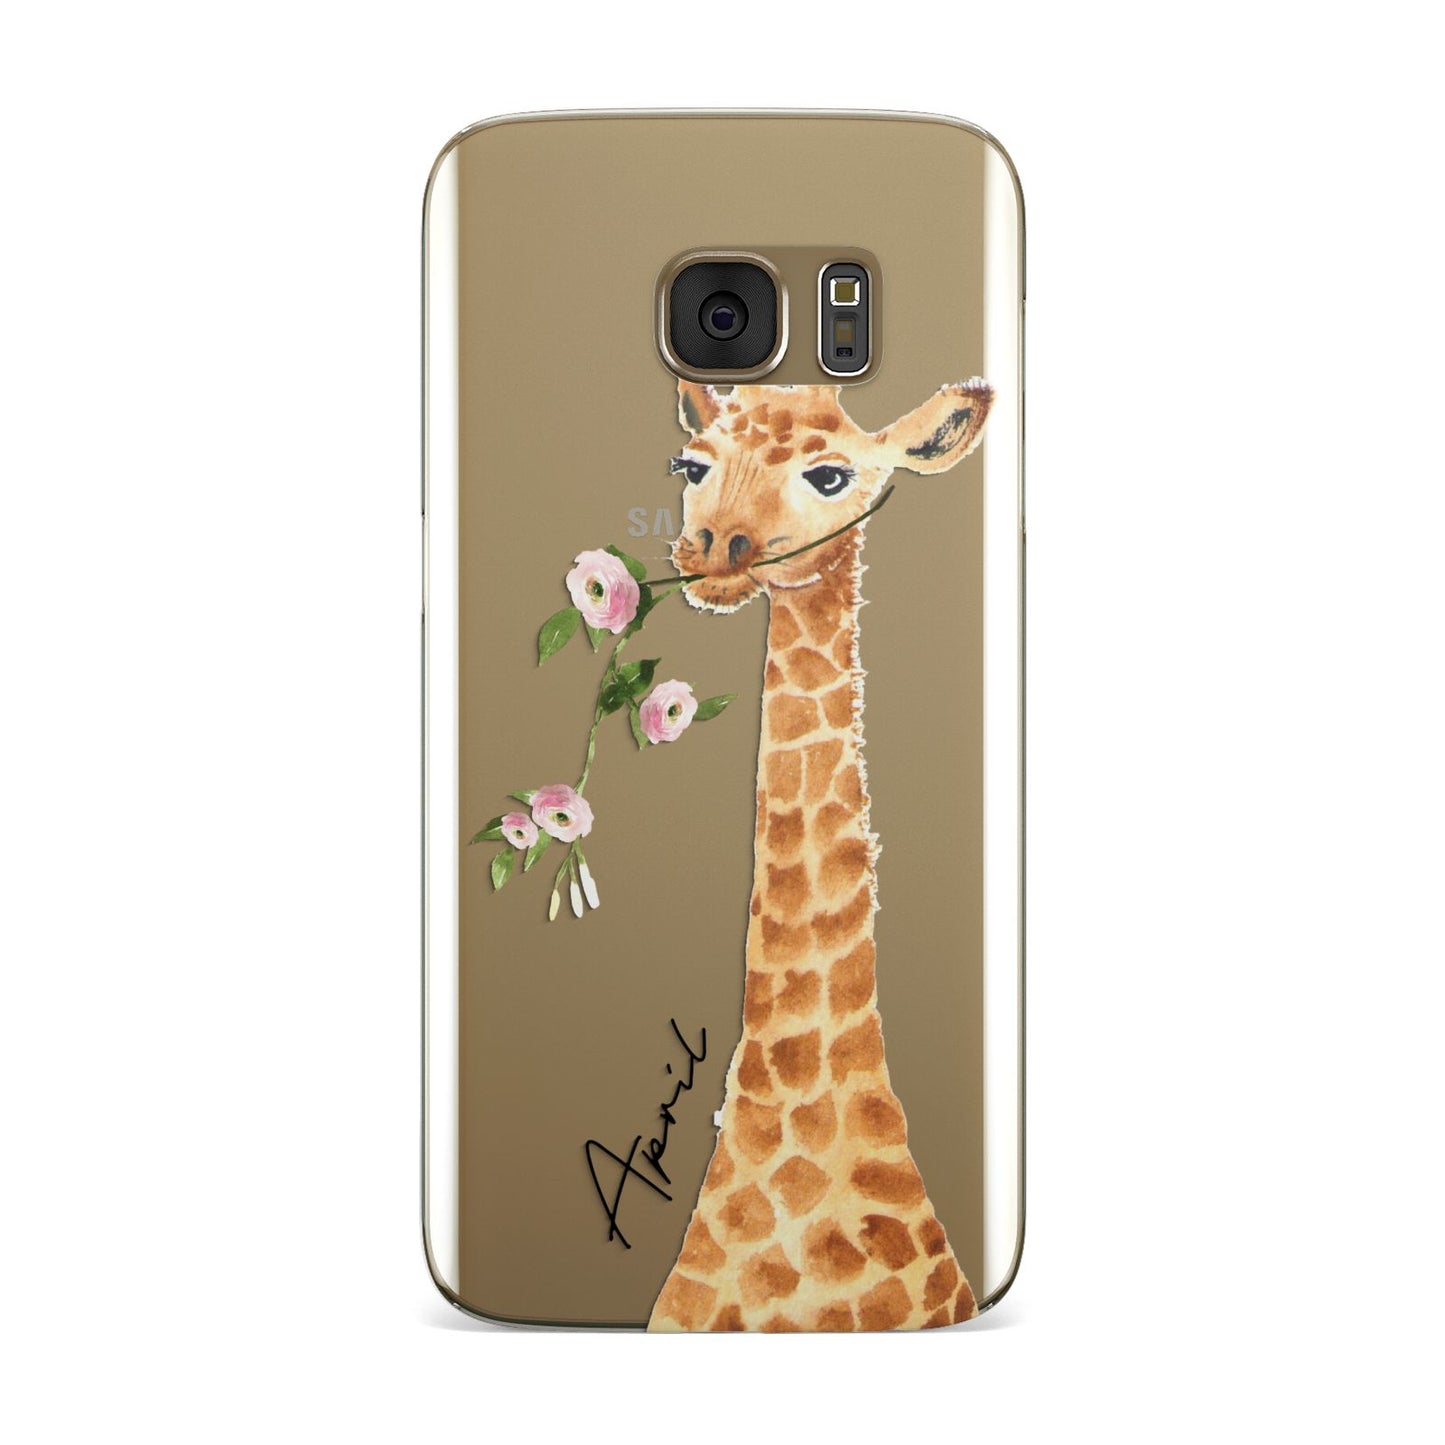 Personalised Giraffe with Name Samsung Galaxy Case